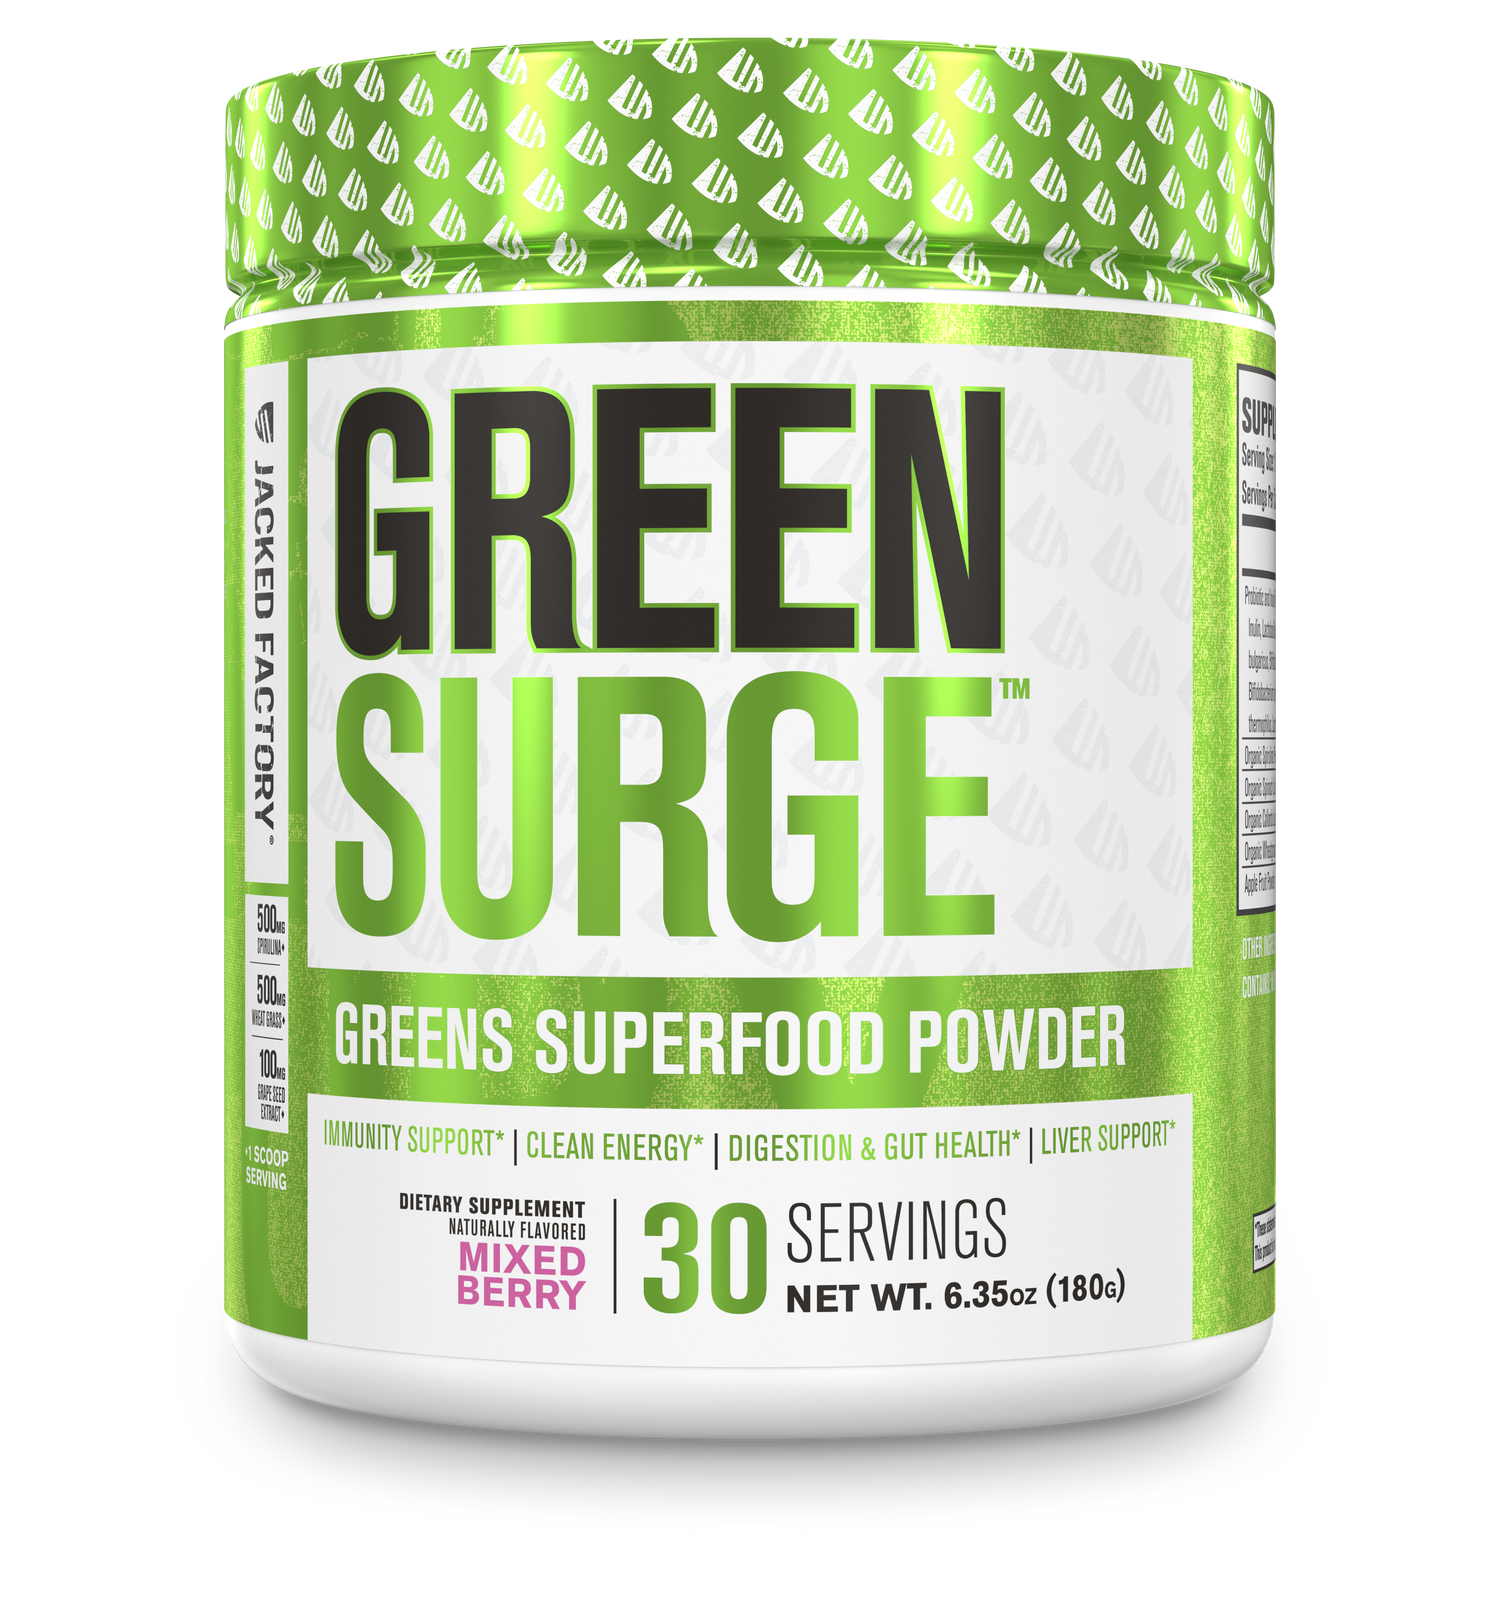 Jacked Factory's Mixed Berry Green Surge powder (30 servings) in a white bottle with bright green label